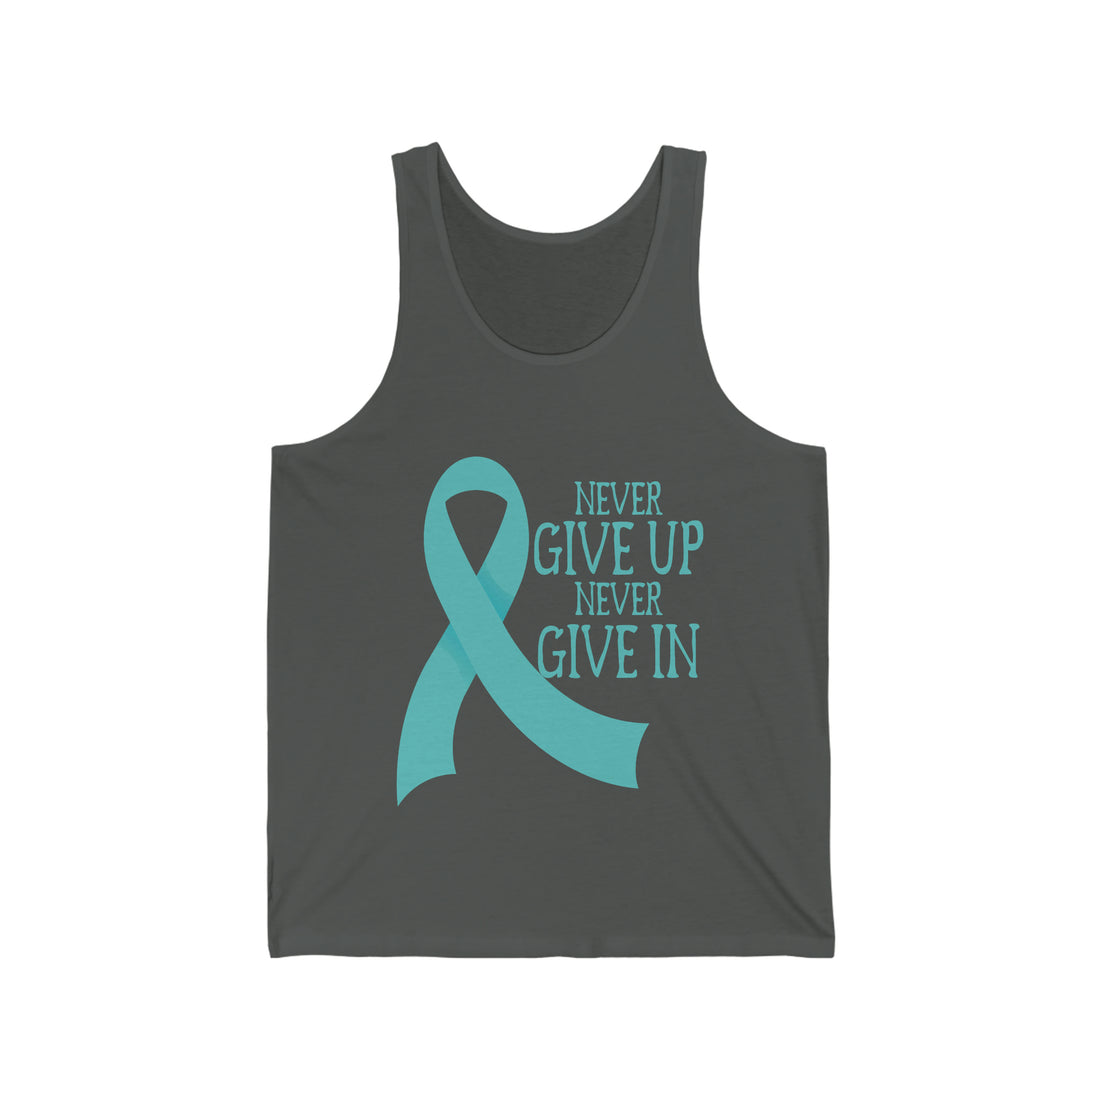 Never Give Up Never Give In - Unisex Jersey Tank Top